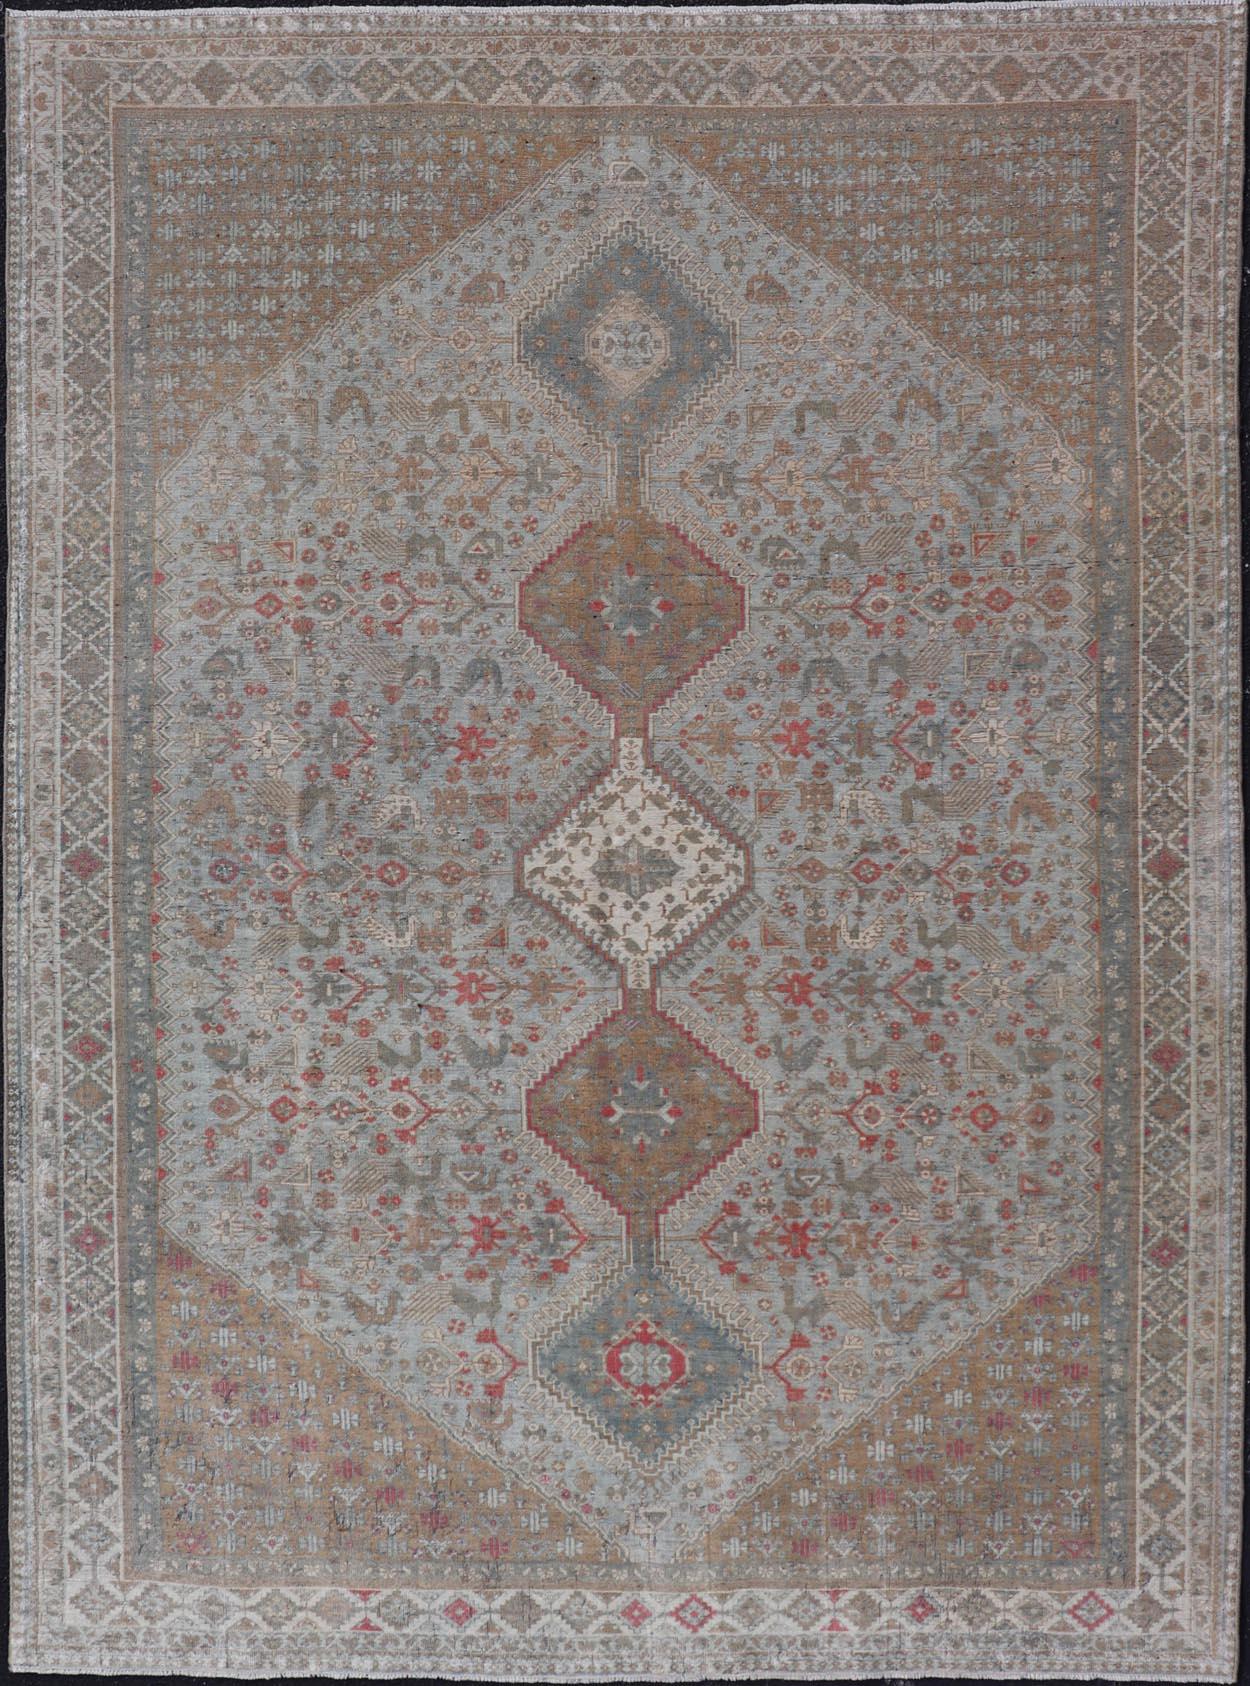  Antique Persian Qashgai Tribal Rug with stacked  diamond medallions and tribal  For Sale